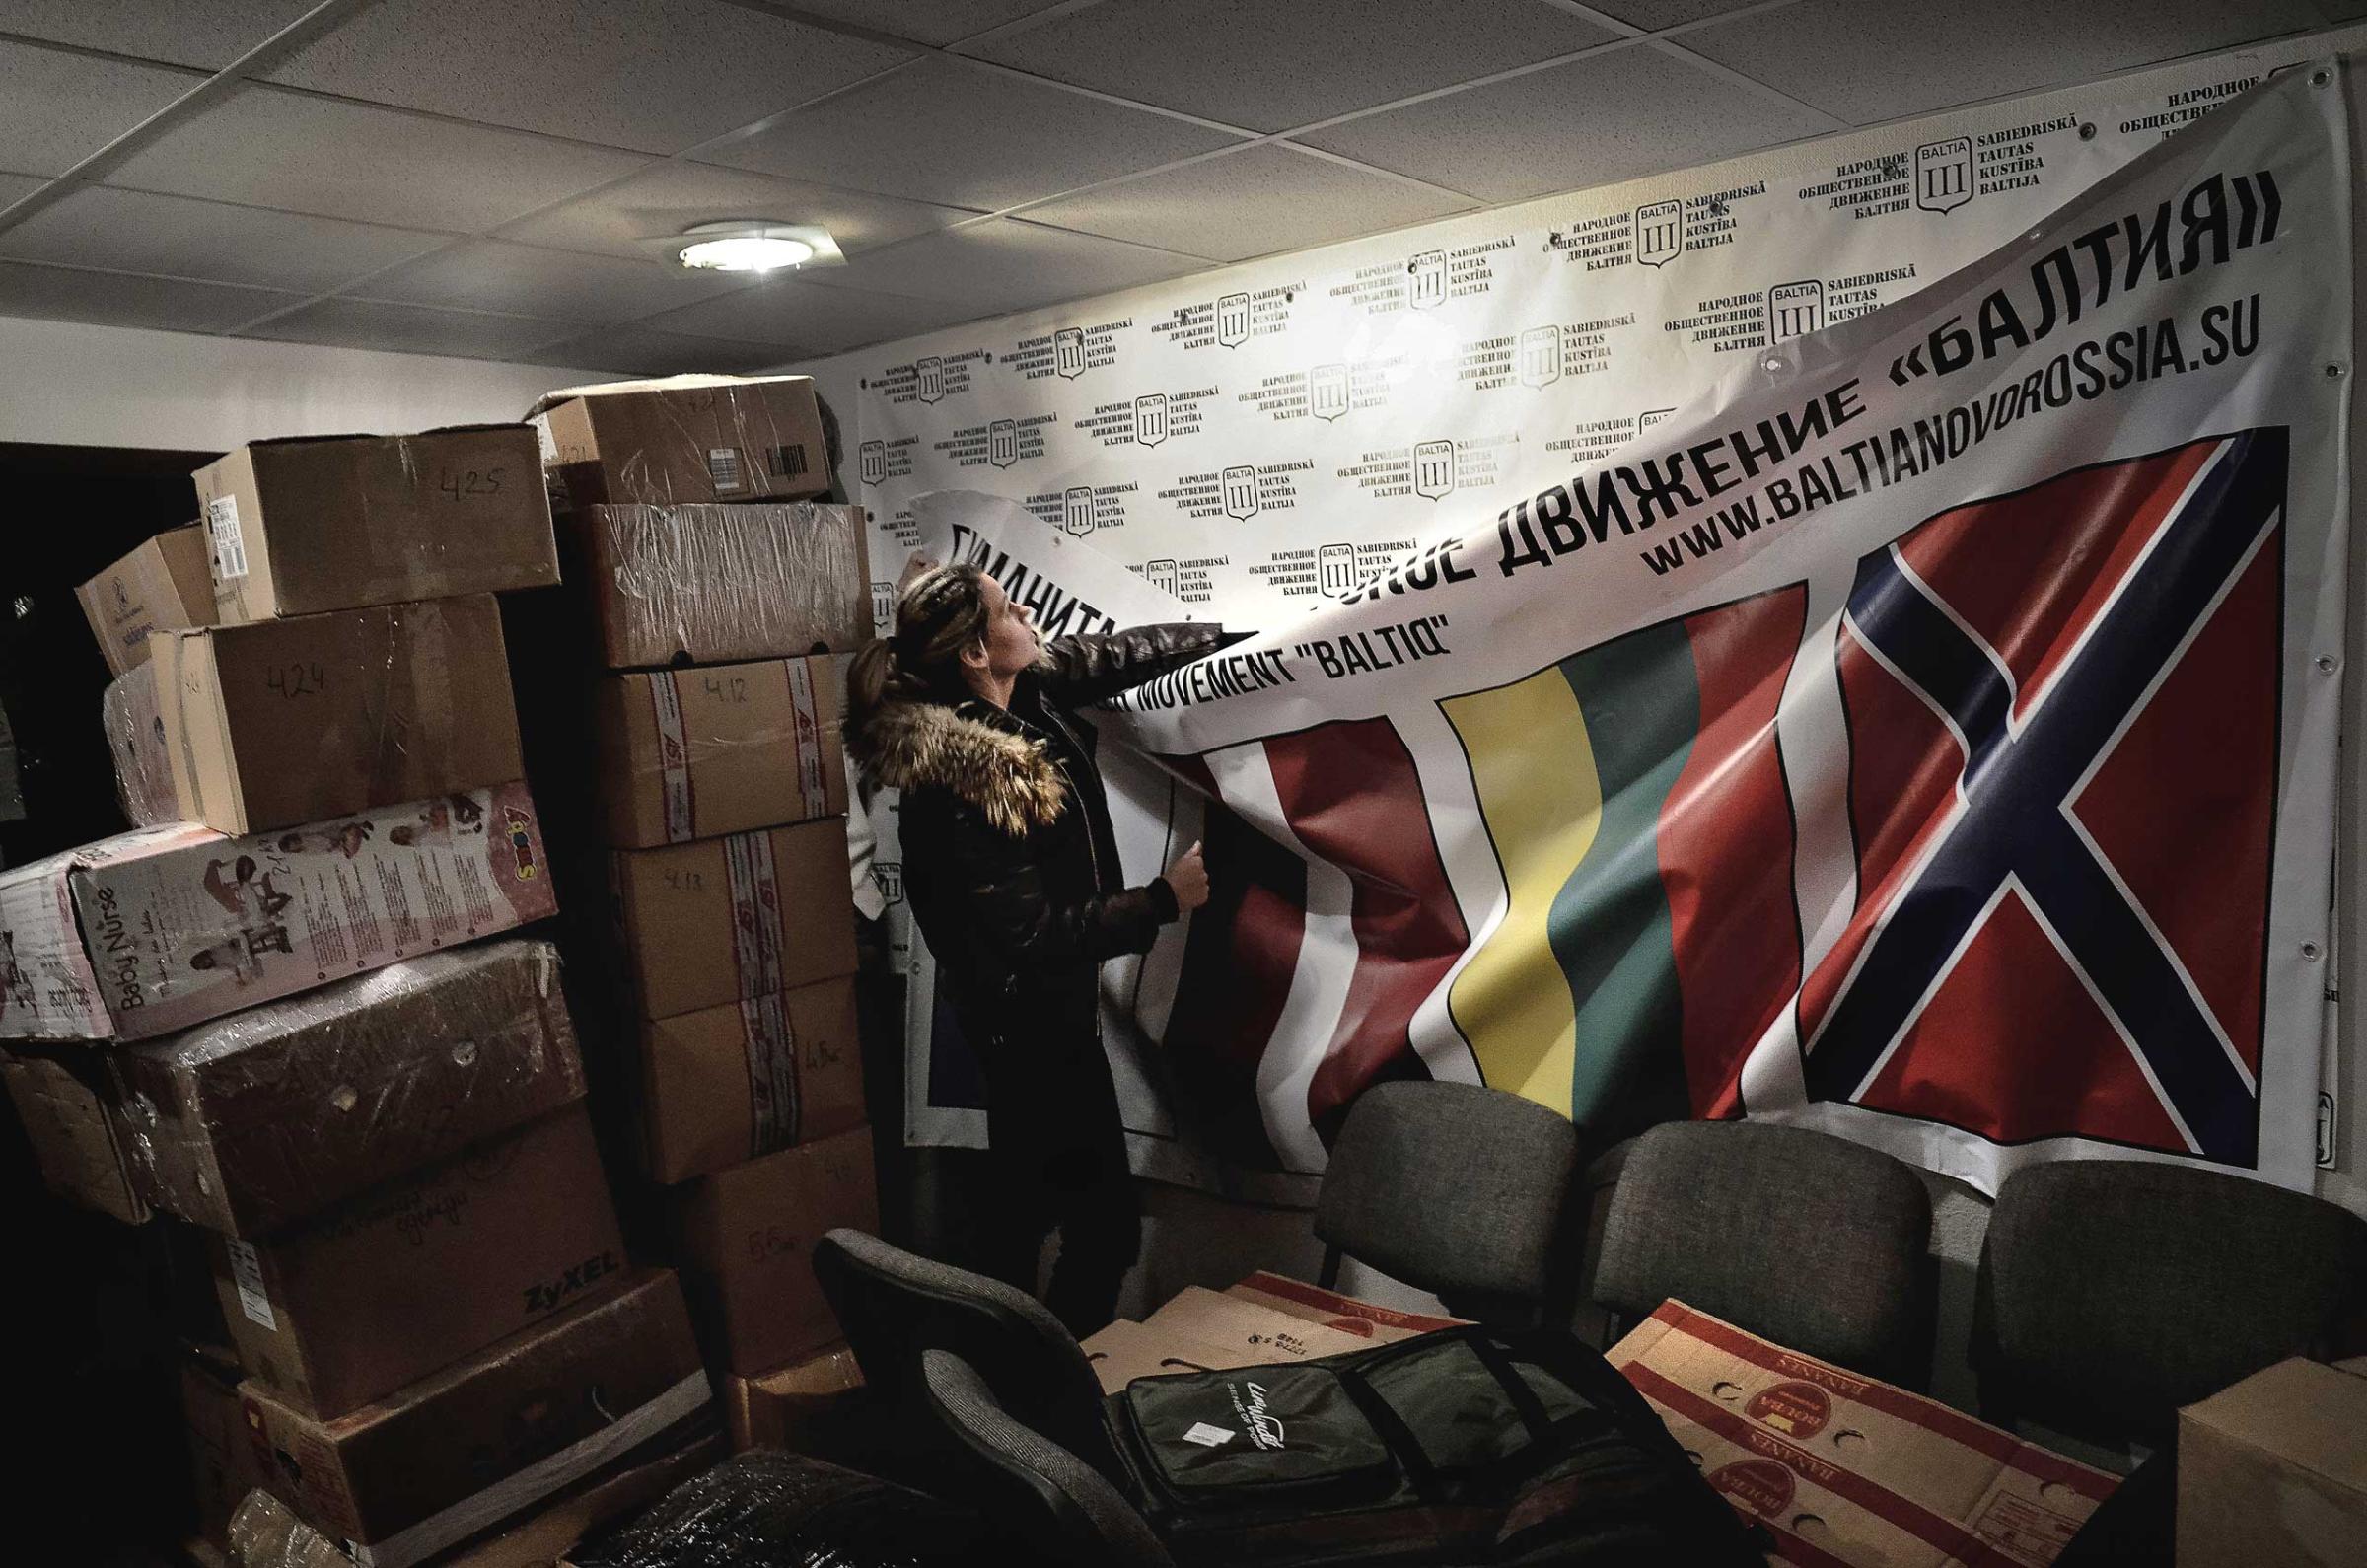 Inside the office of an organization in Riga, Latvia, that provides humanitarian aid to separatists in the East of Ukraine. A volunteer takes down a banner showing the flags of Estonia, Latvia, Lithuania and the self-proclaimed confederation of Novorossiya in the East of Ukraine.